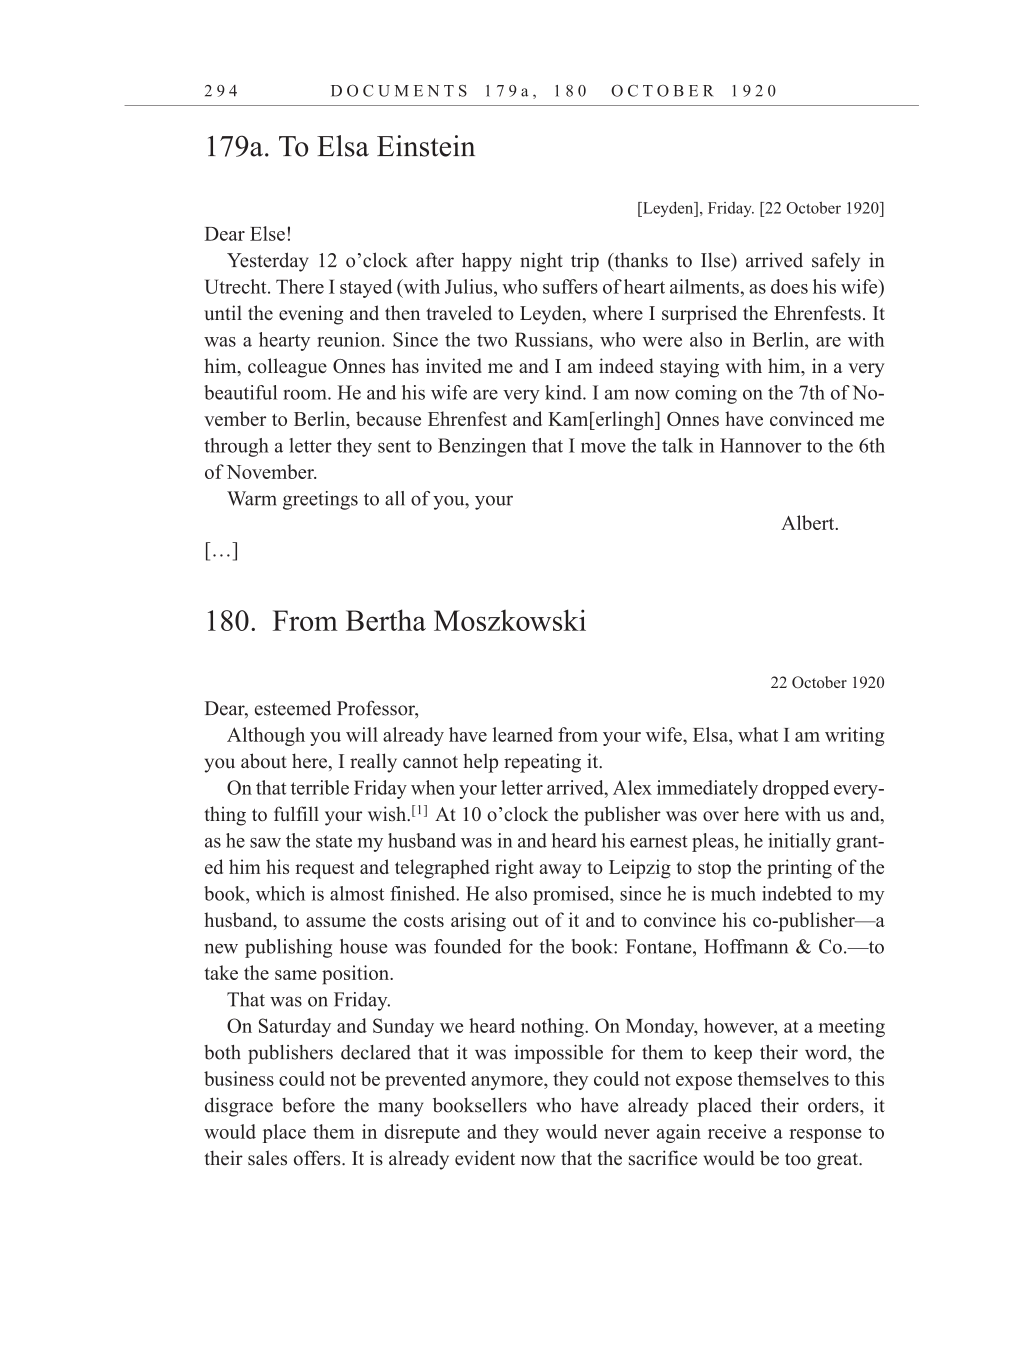 Volume 10: The Berlin Years: Correspondence, May-December 1920, and Supplementary Correspondence, 1909-1920 (English translation supplement) page 294